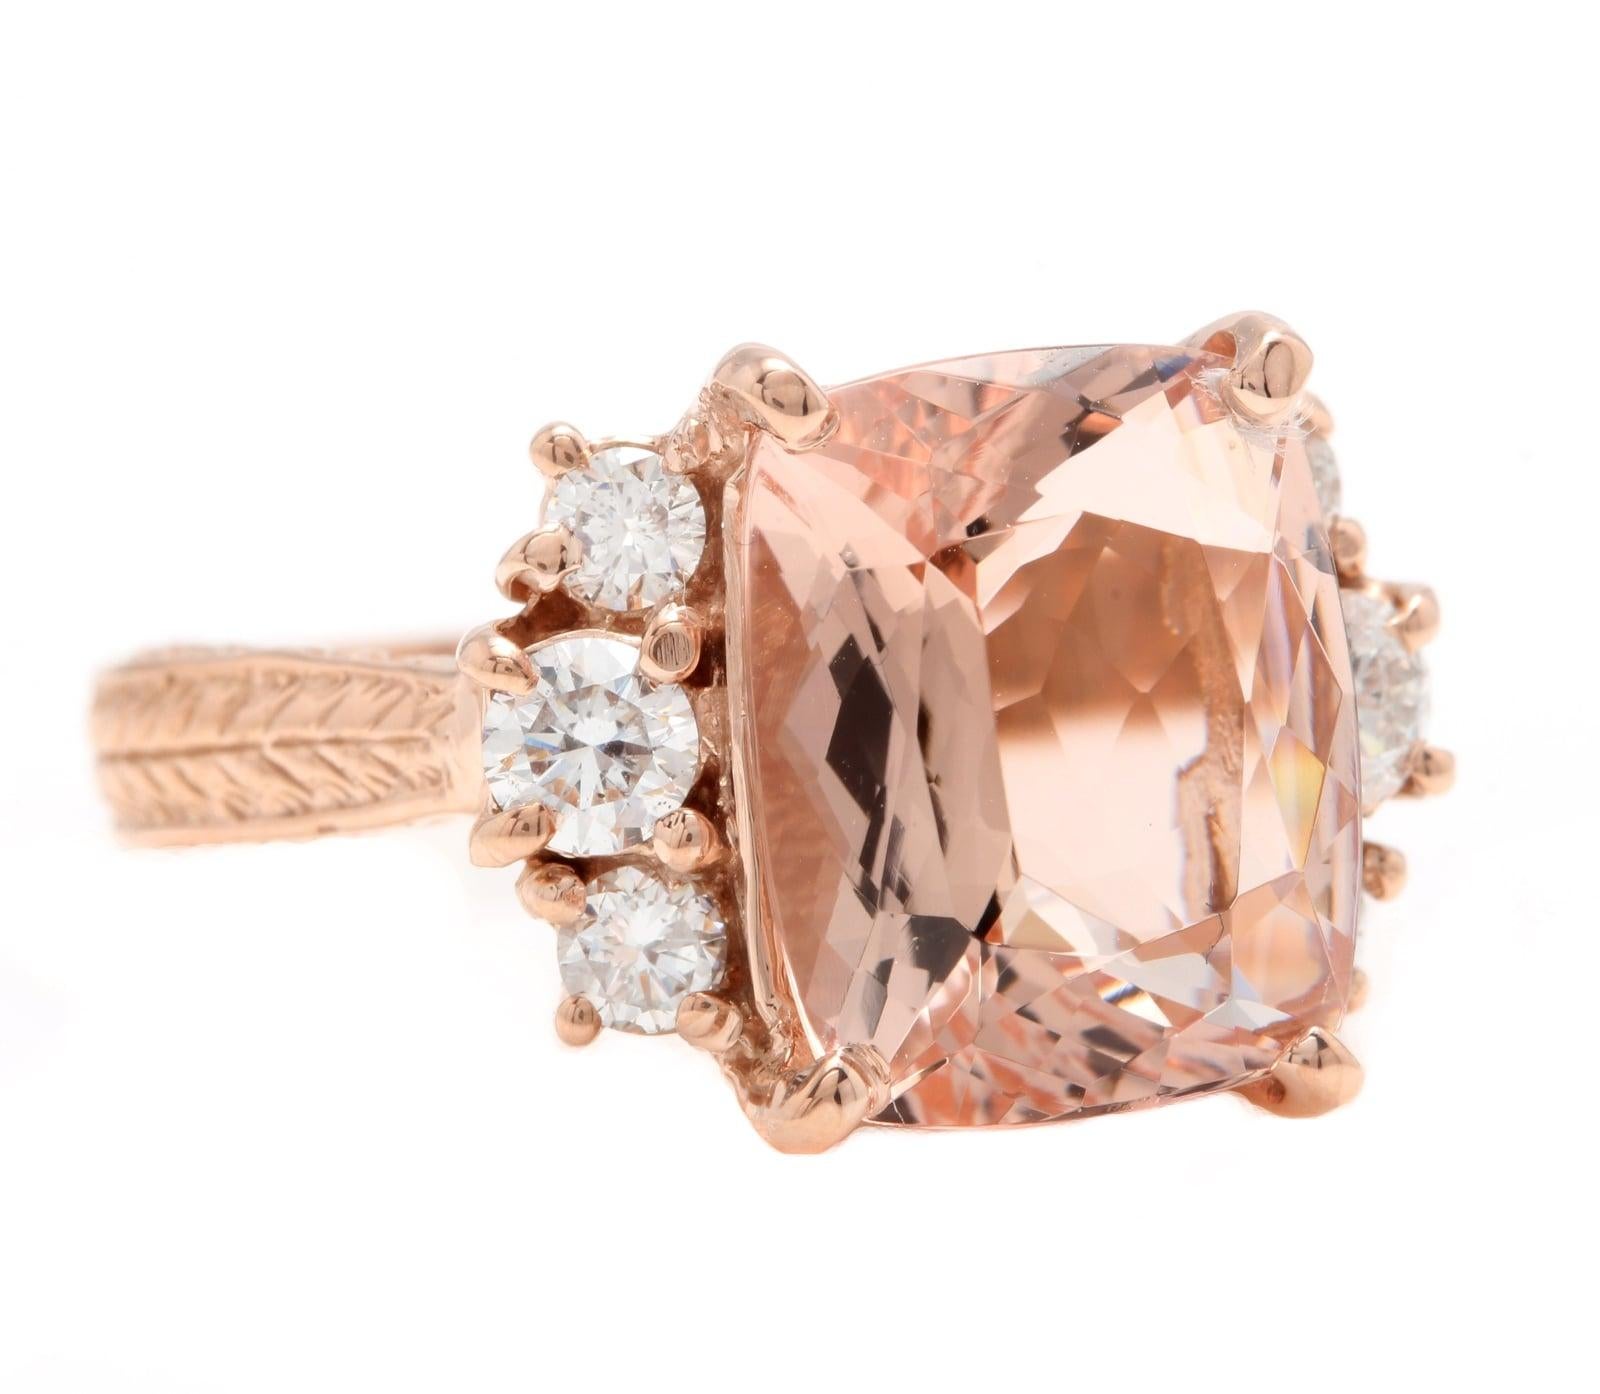 7.25 Carats Exquisite Natural Morganite and Diamond 14K Solid Rose Gold Ring

Suggested Replacement Value: $6,200.00

Total Natural Cushion Morganite Weights: Approx. 6.50 Carats

Morganite Measures: Approx. 12.00 x 10.00mm

Natural Round Diamonds